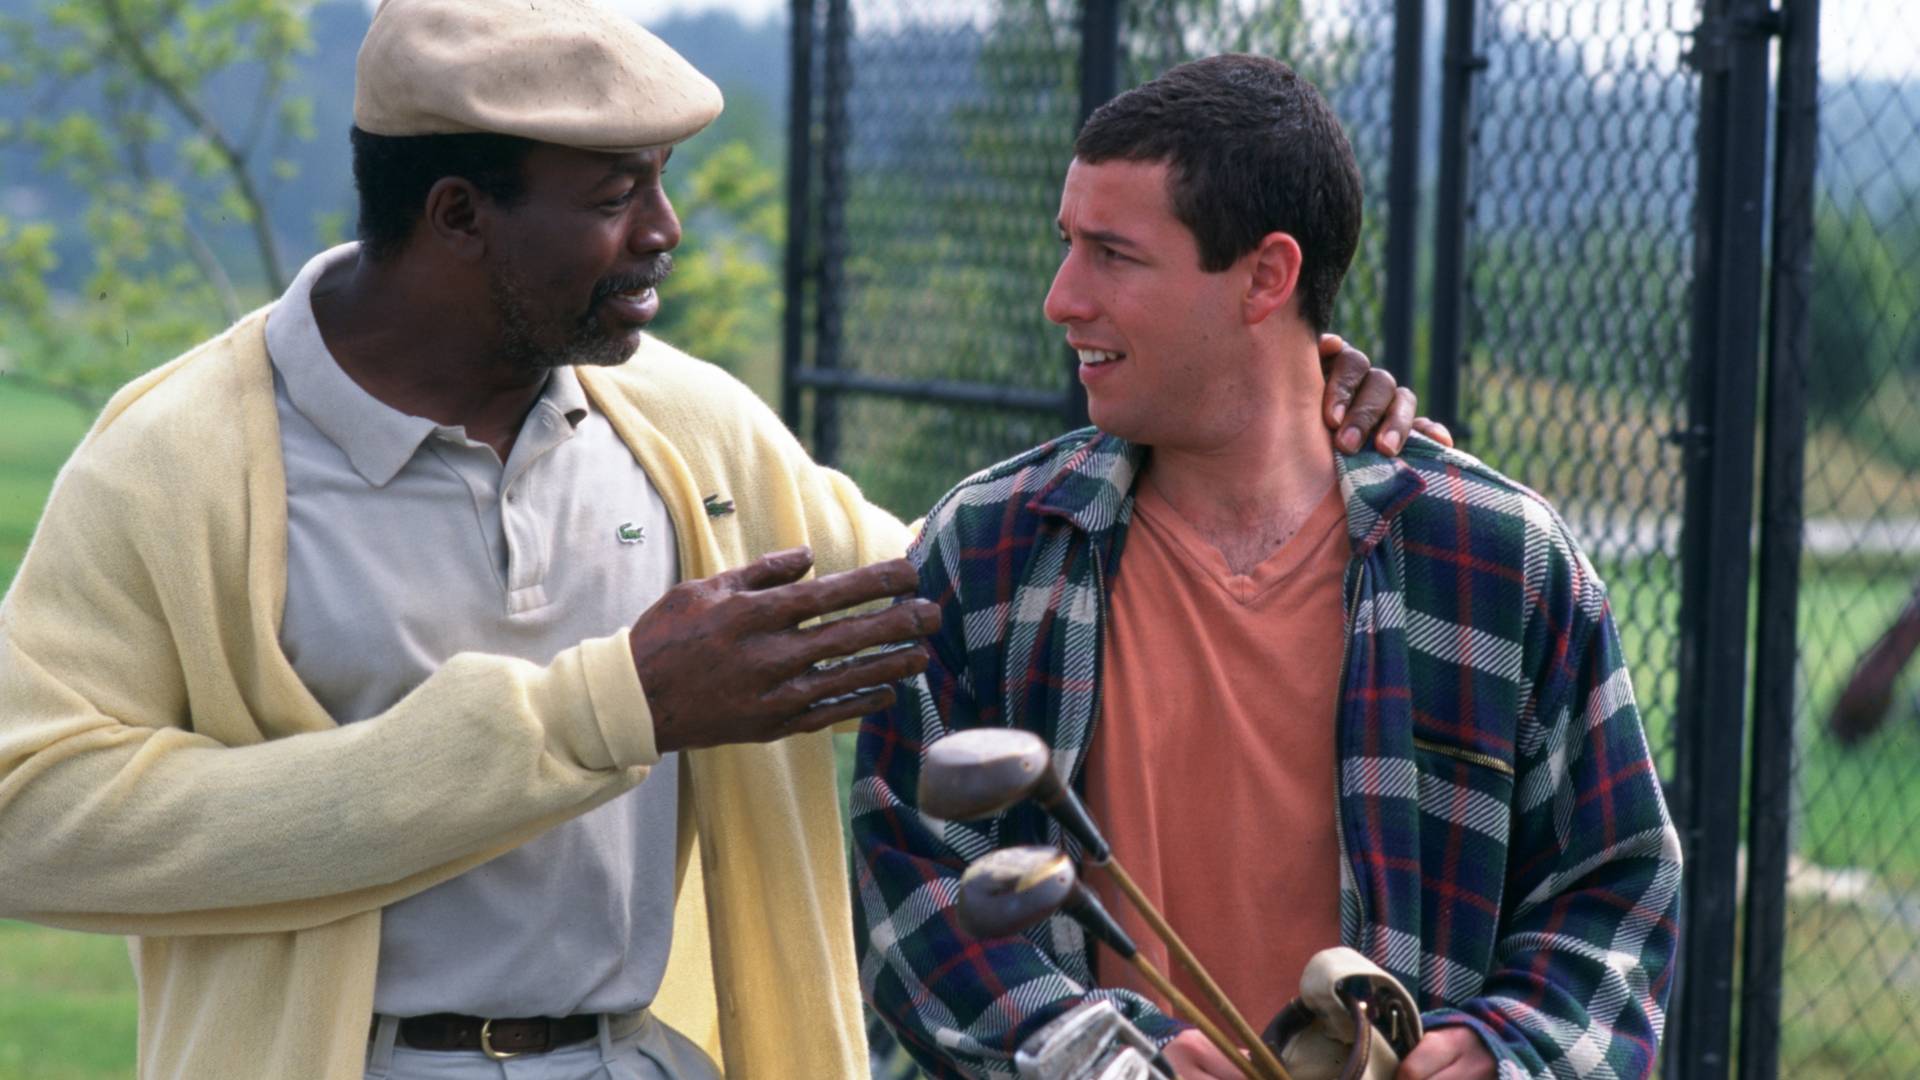 adam sandler in happy gilmore playing golf in a career change